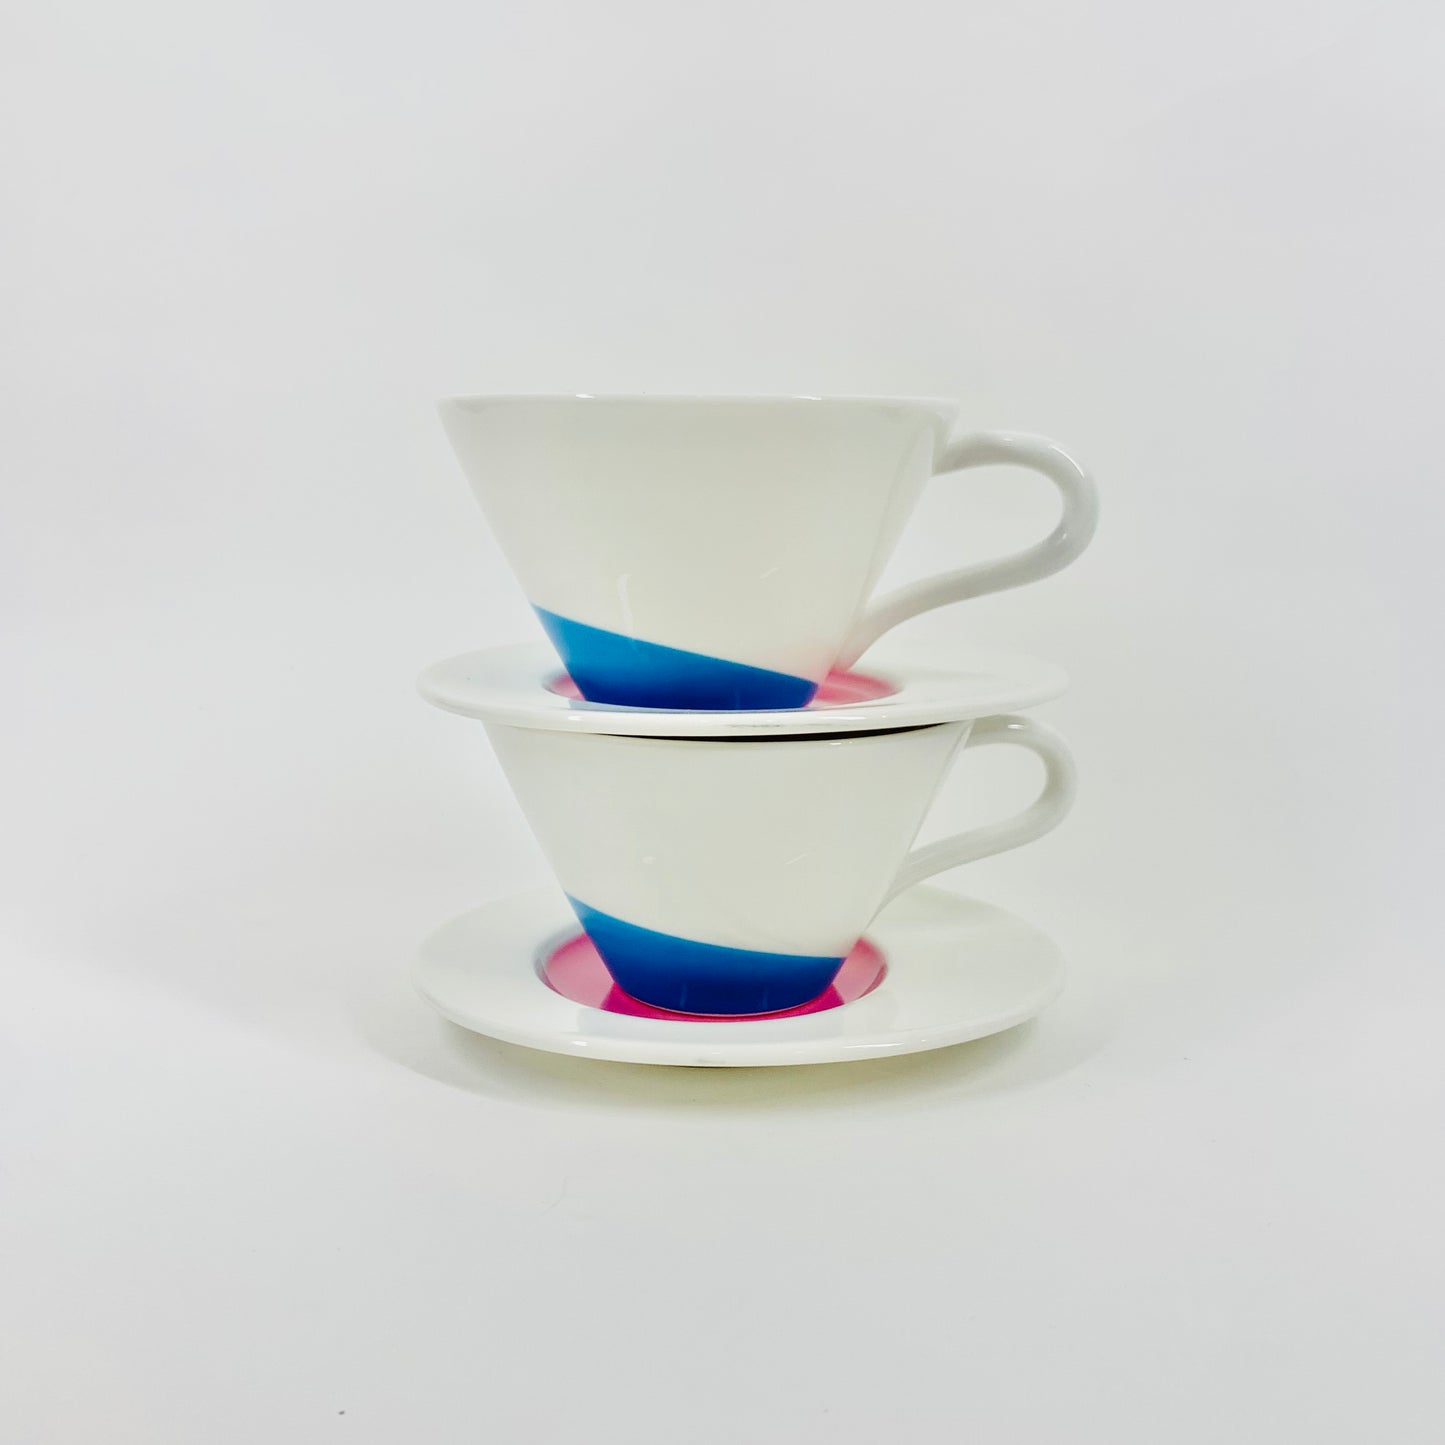 1980s Villeroy & Boch Memphis white porcelain coffee cup and matching saucer